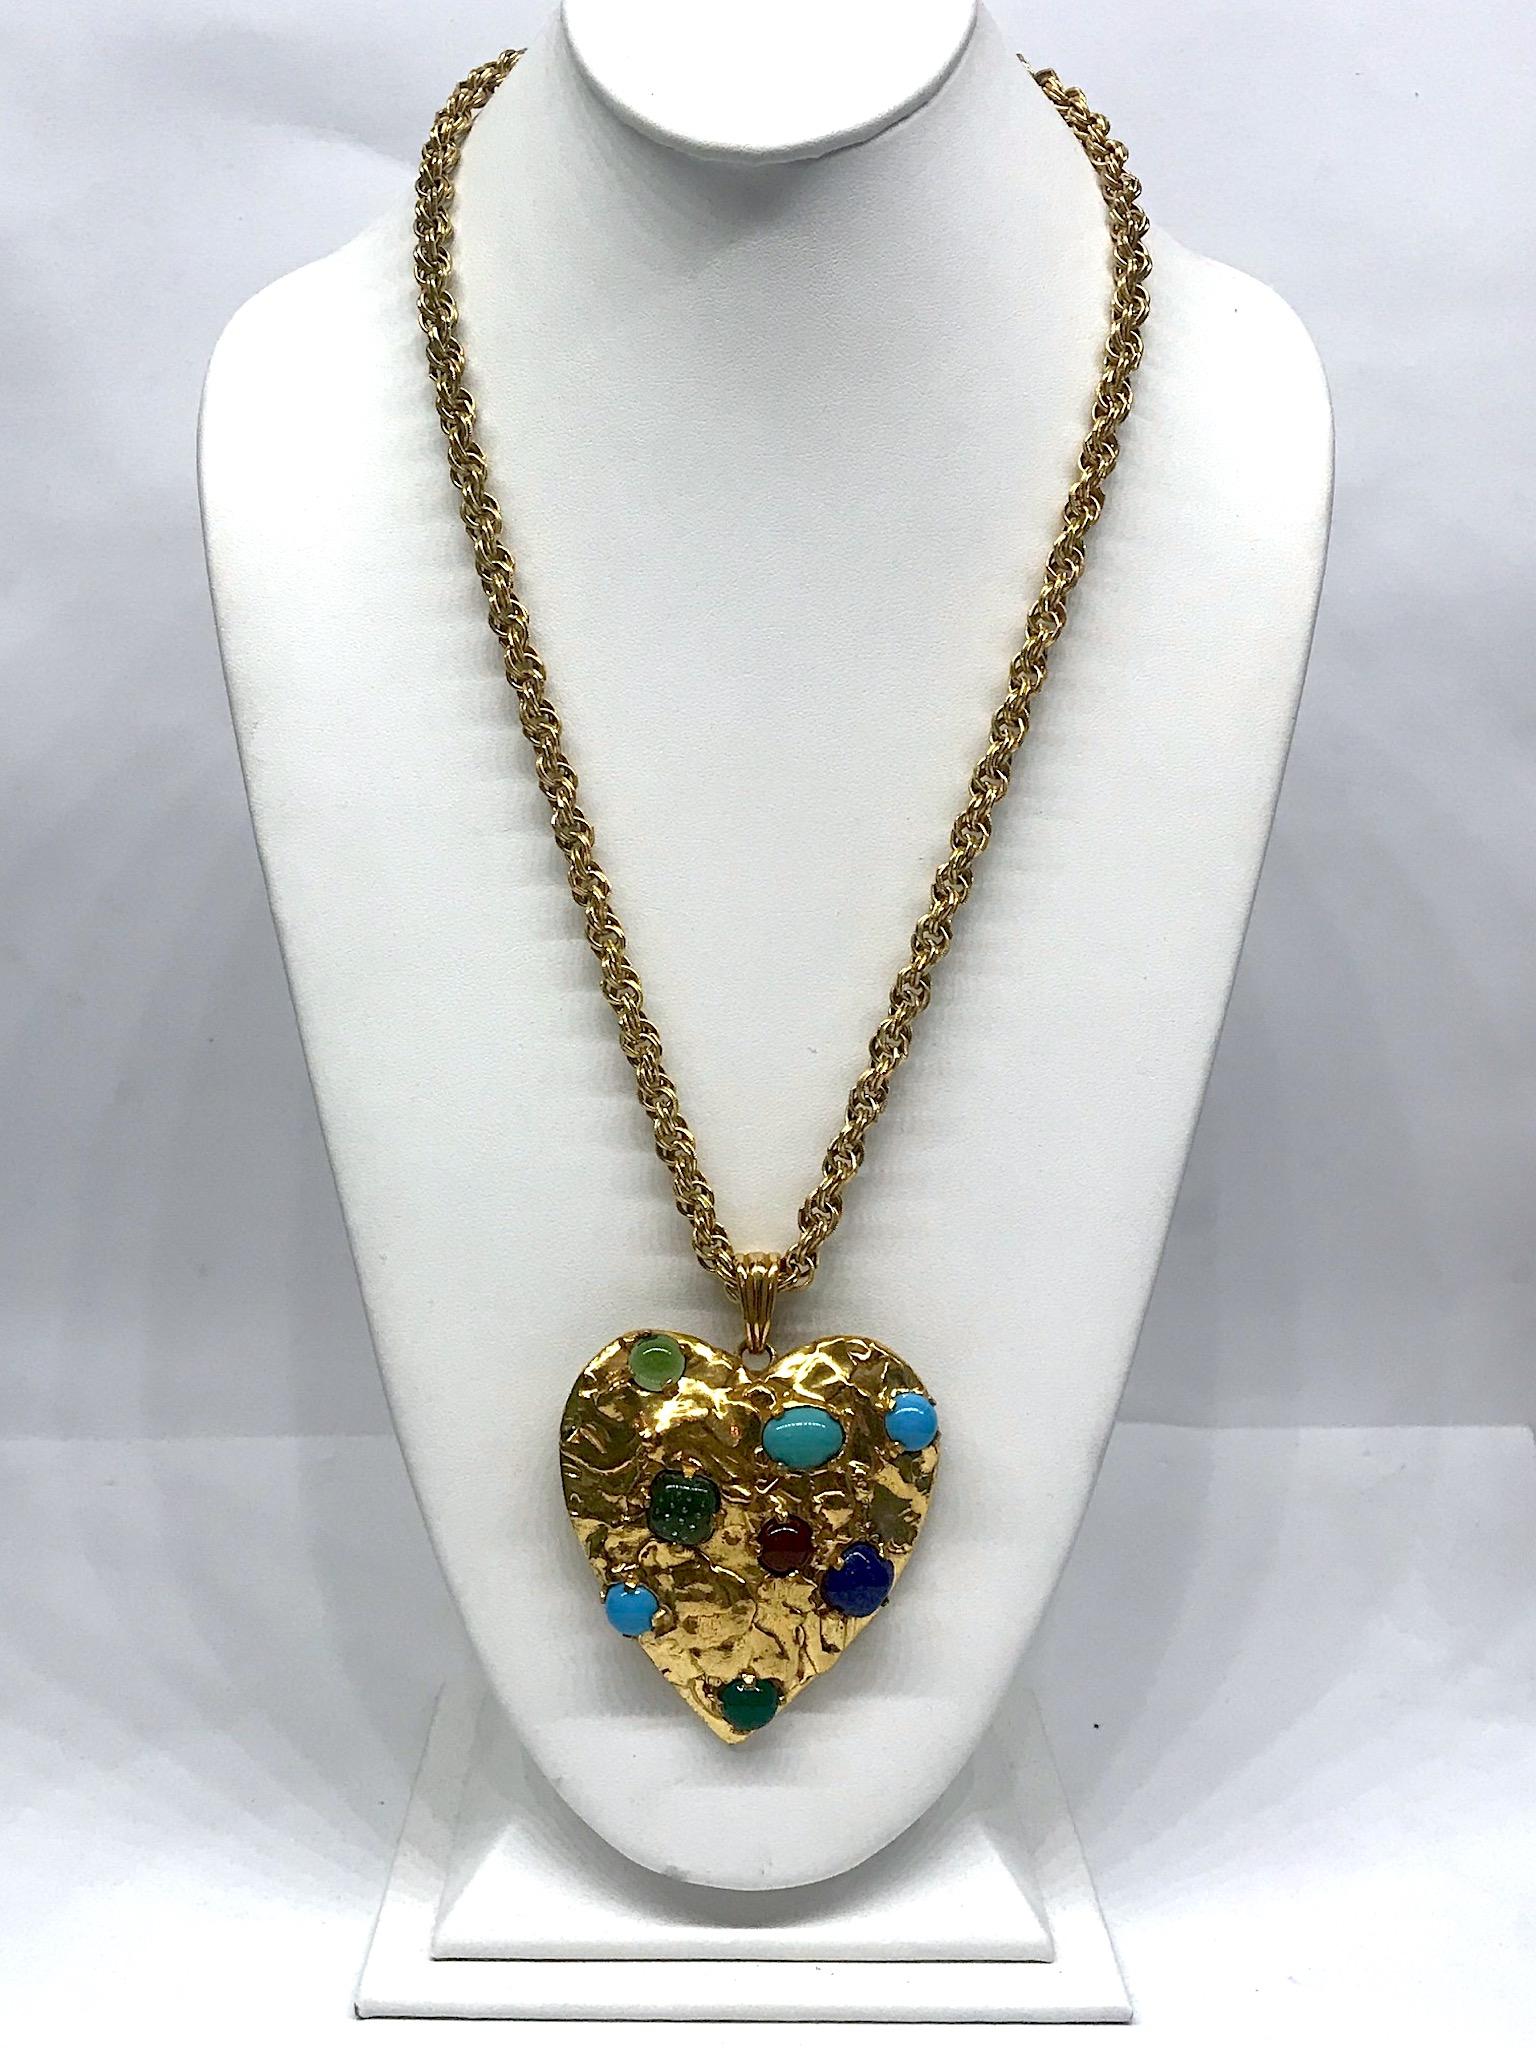 A sculptural large heart pendant necklace by American fashion jewelry company Castlecliff. The large heart is cast with a rough gold nugget texture. It is gold plated and set with eight glass cabochons in translucent green,  turquoise color,  jade